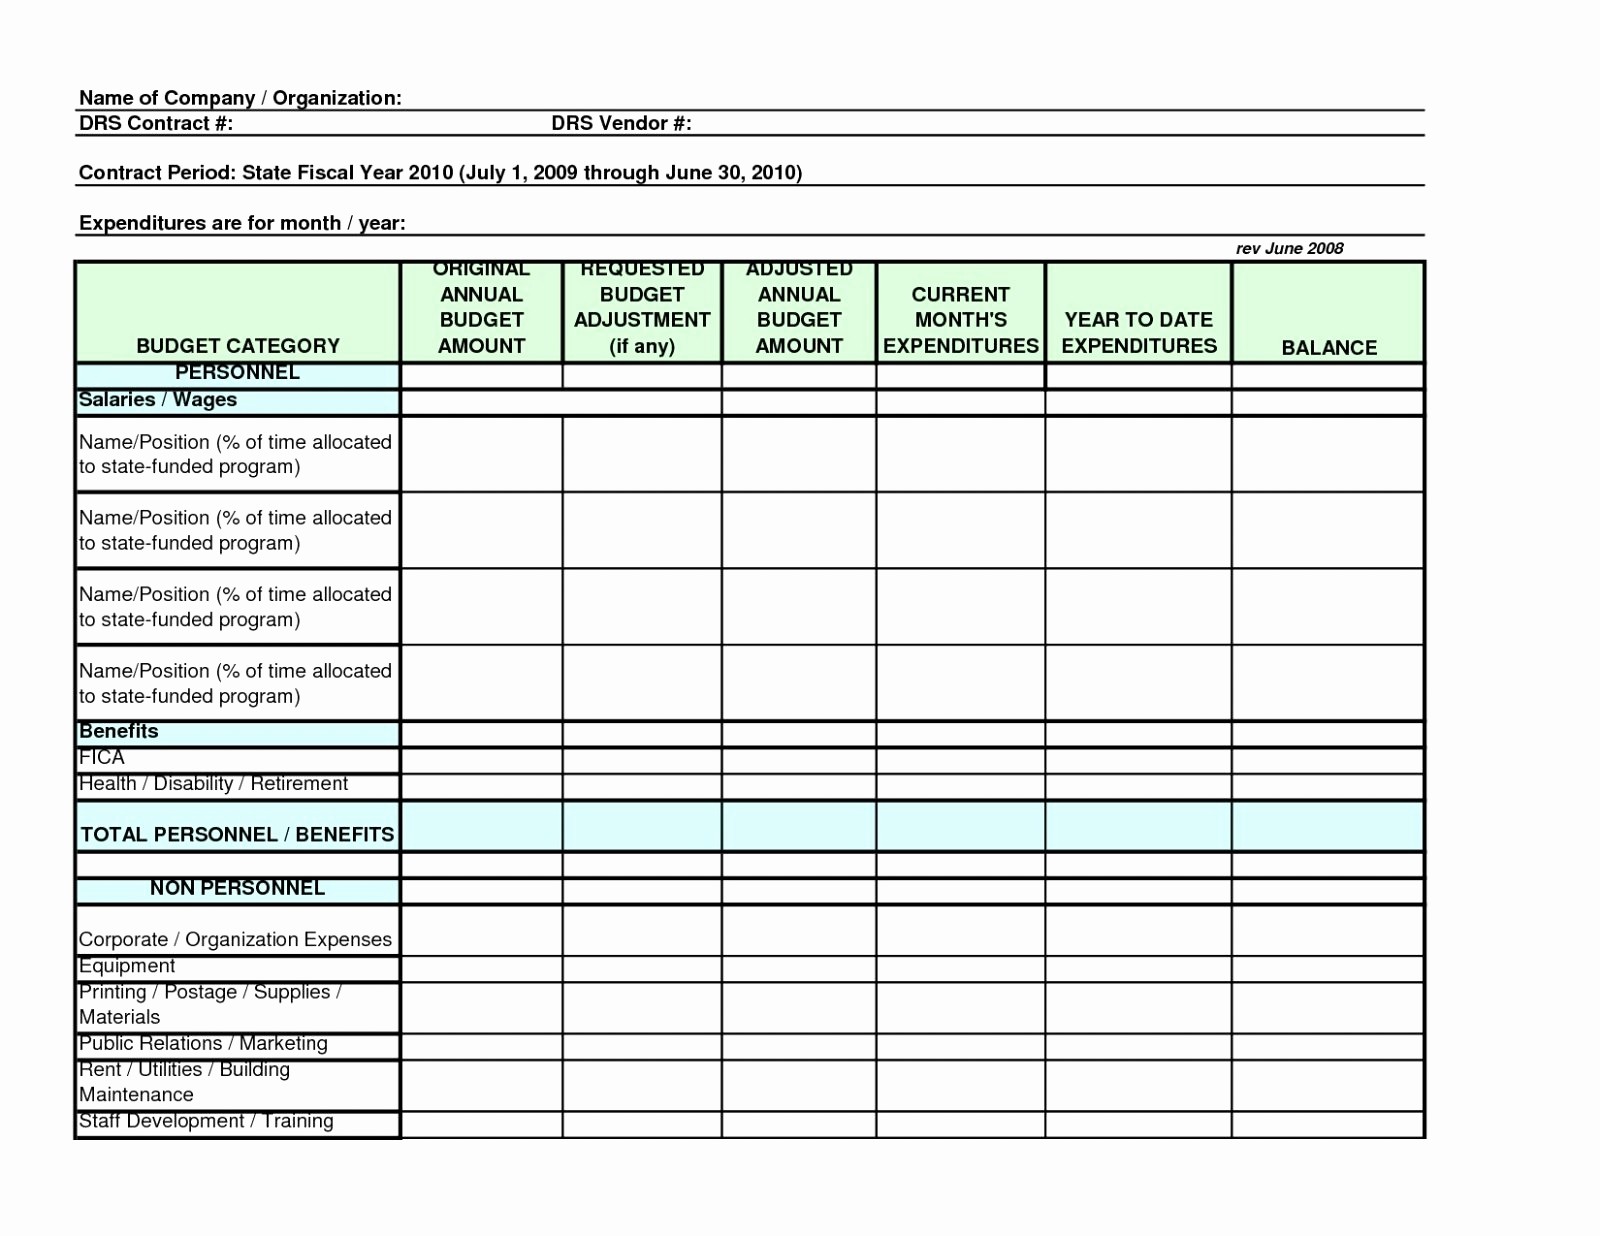 50 Awesome Calculate Pto Accrual Excel Template DOCUMENTS IDEAS